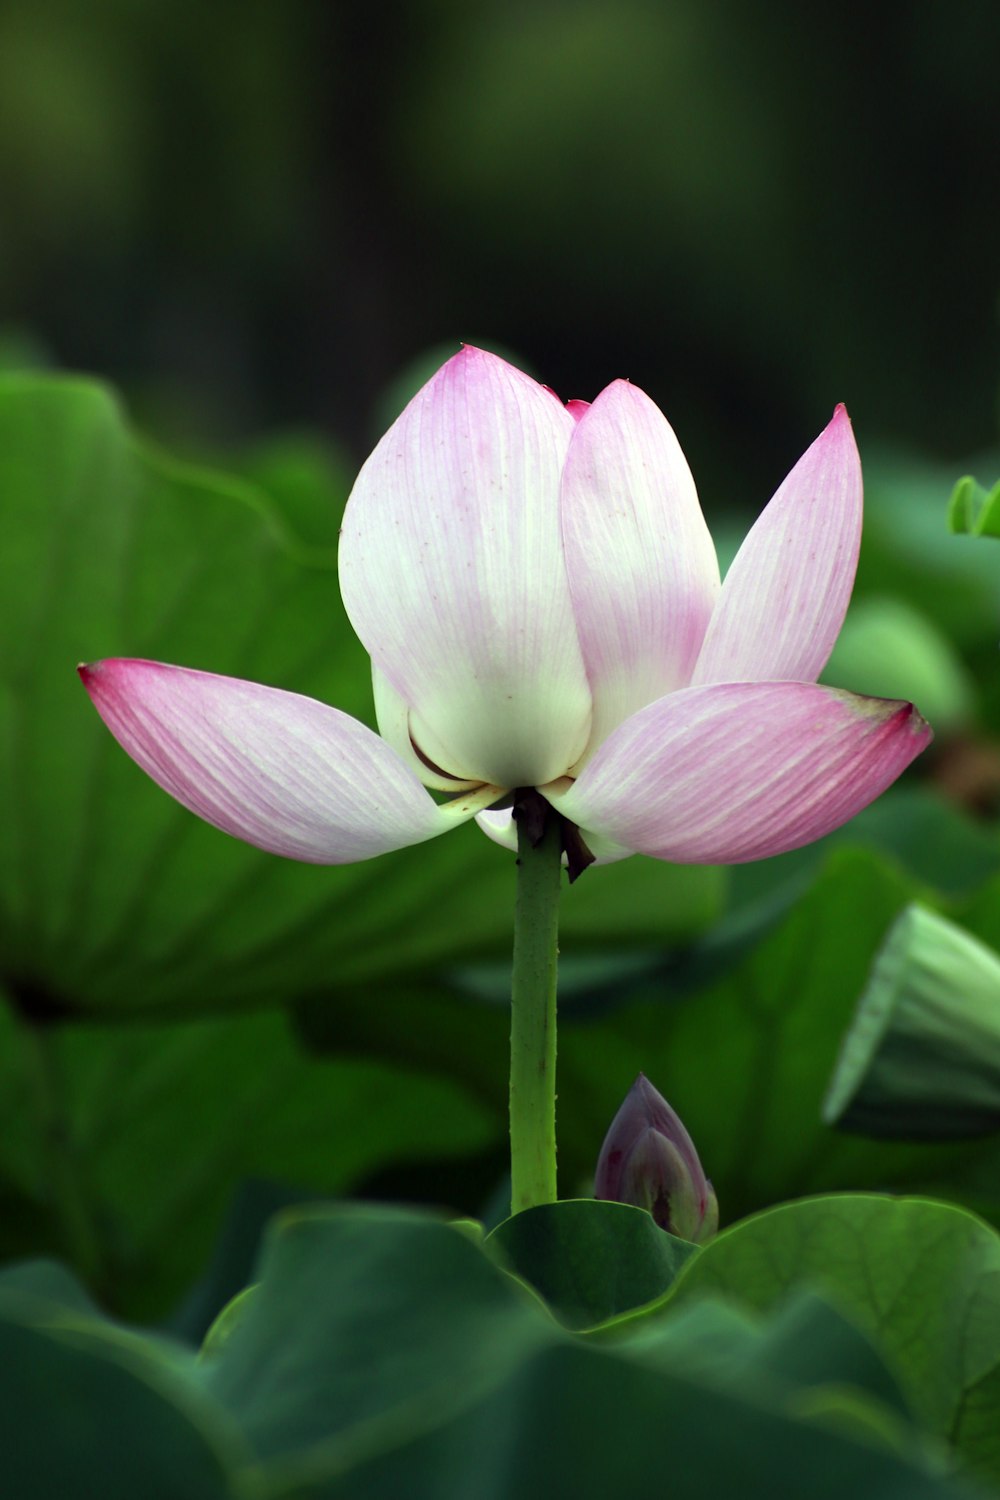 pink and white lotus flower in close-up photography